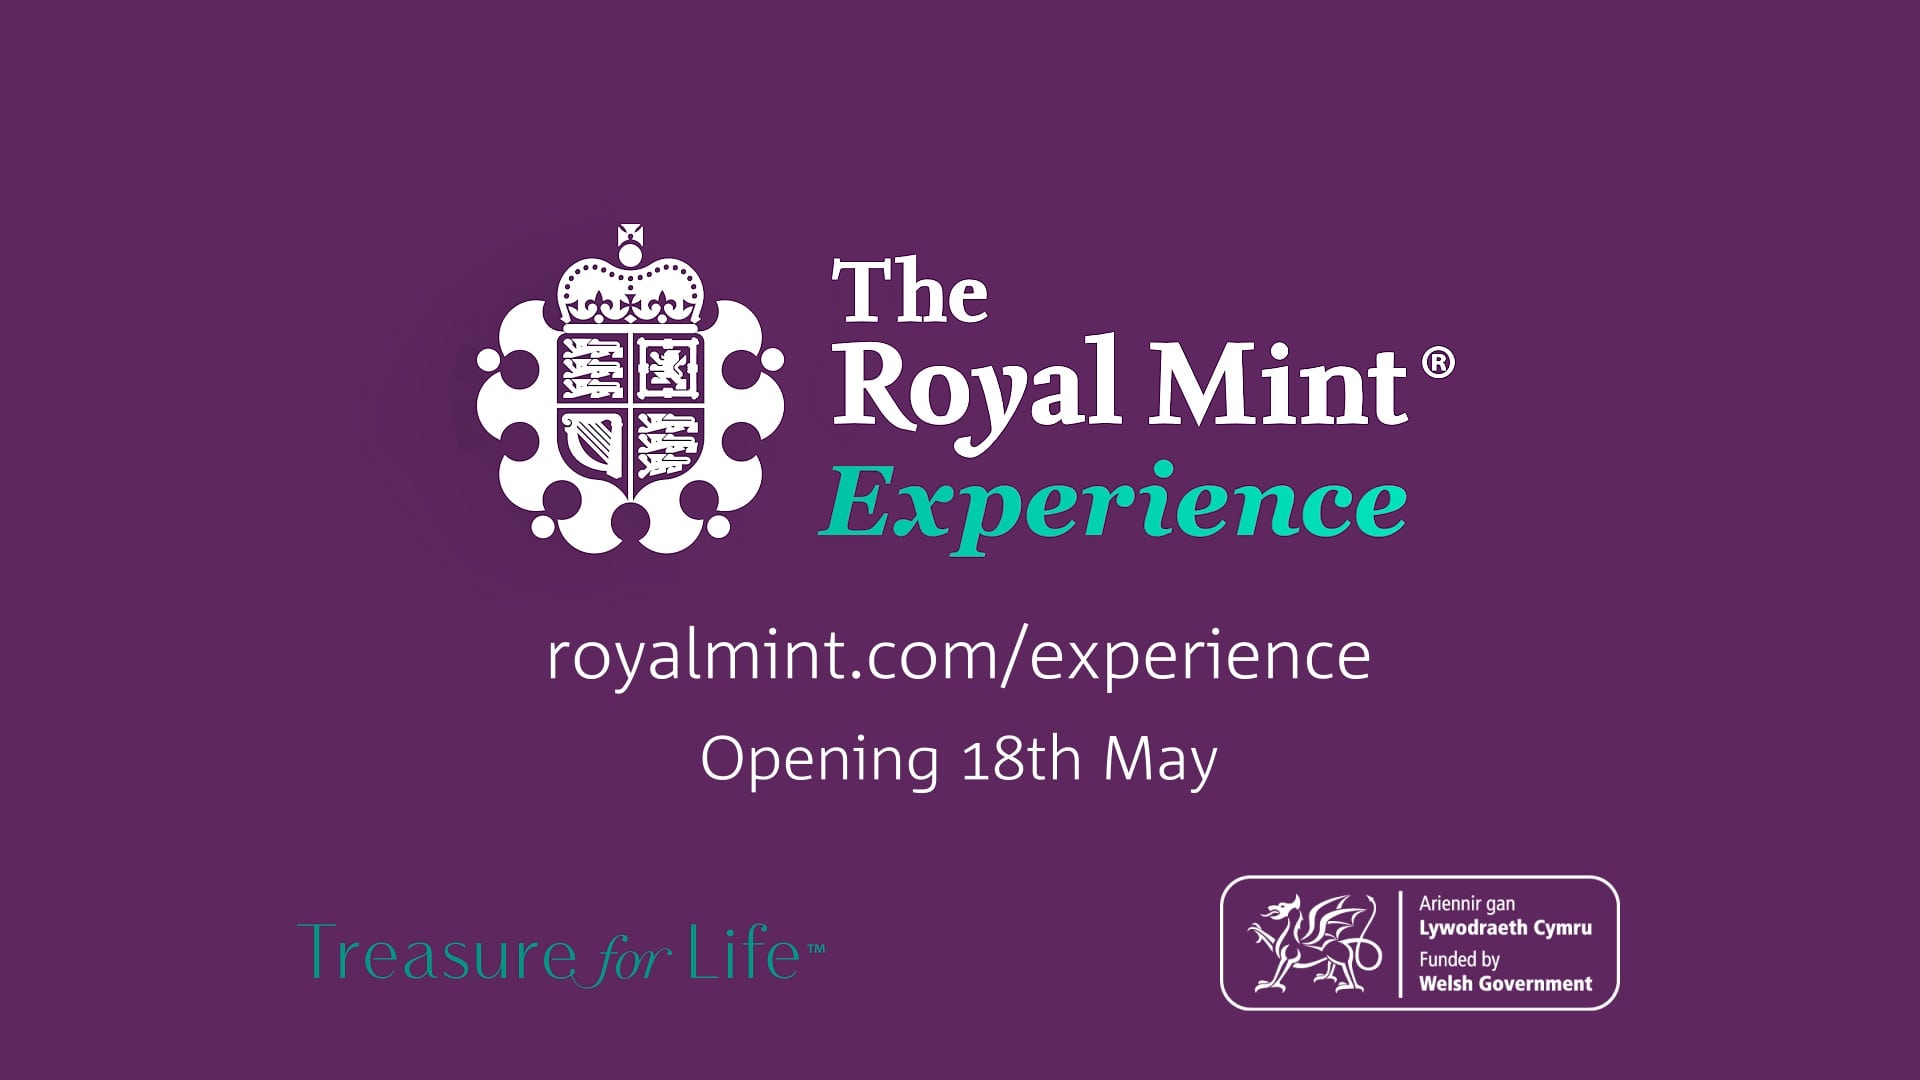 animated film for an event - royal mint experience logo and details